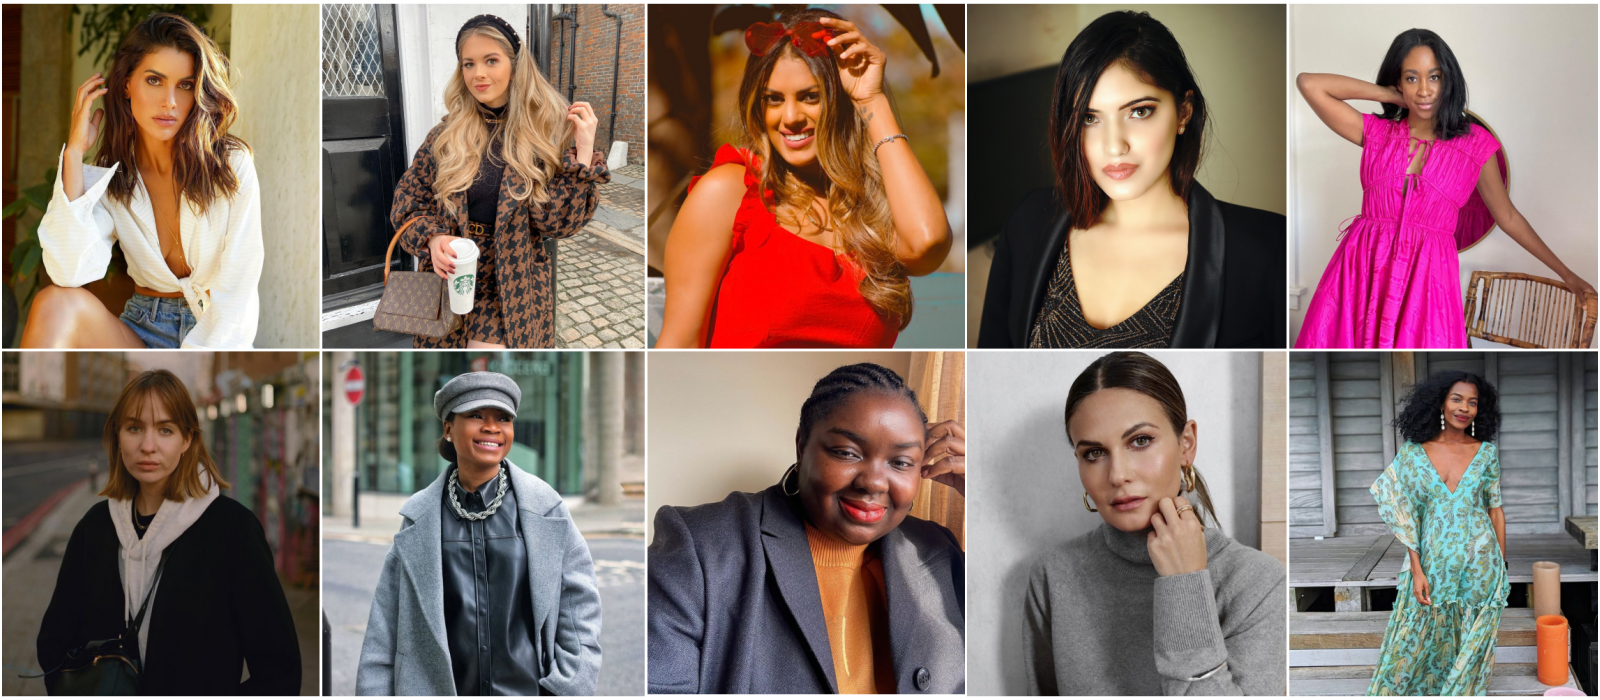 10 Of The Leading Fashion Influencers You Should Follow